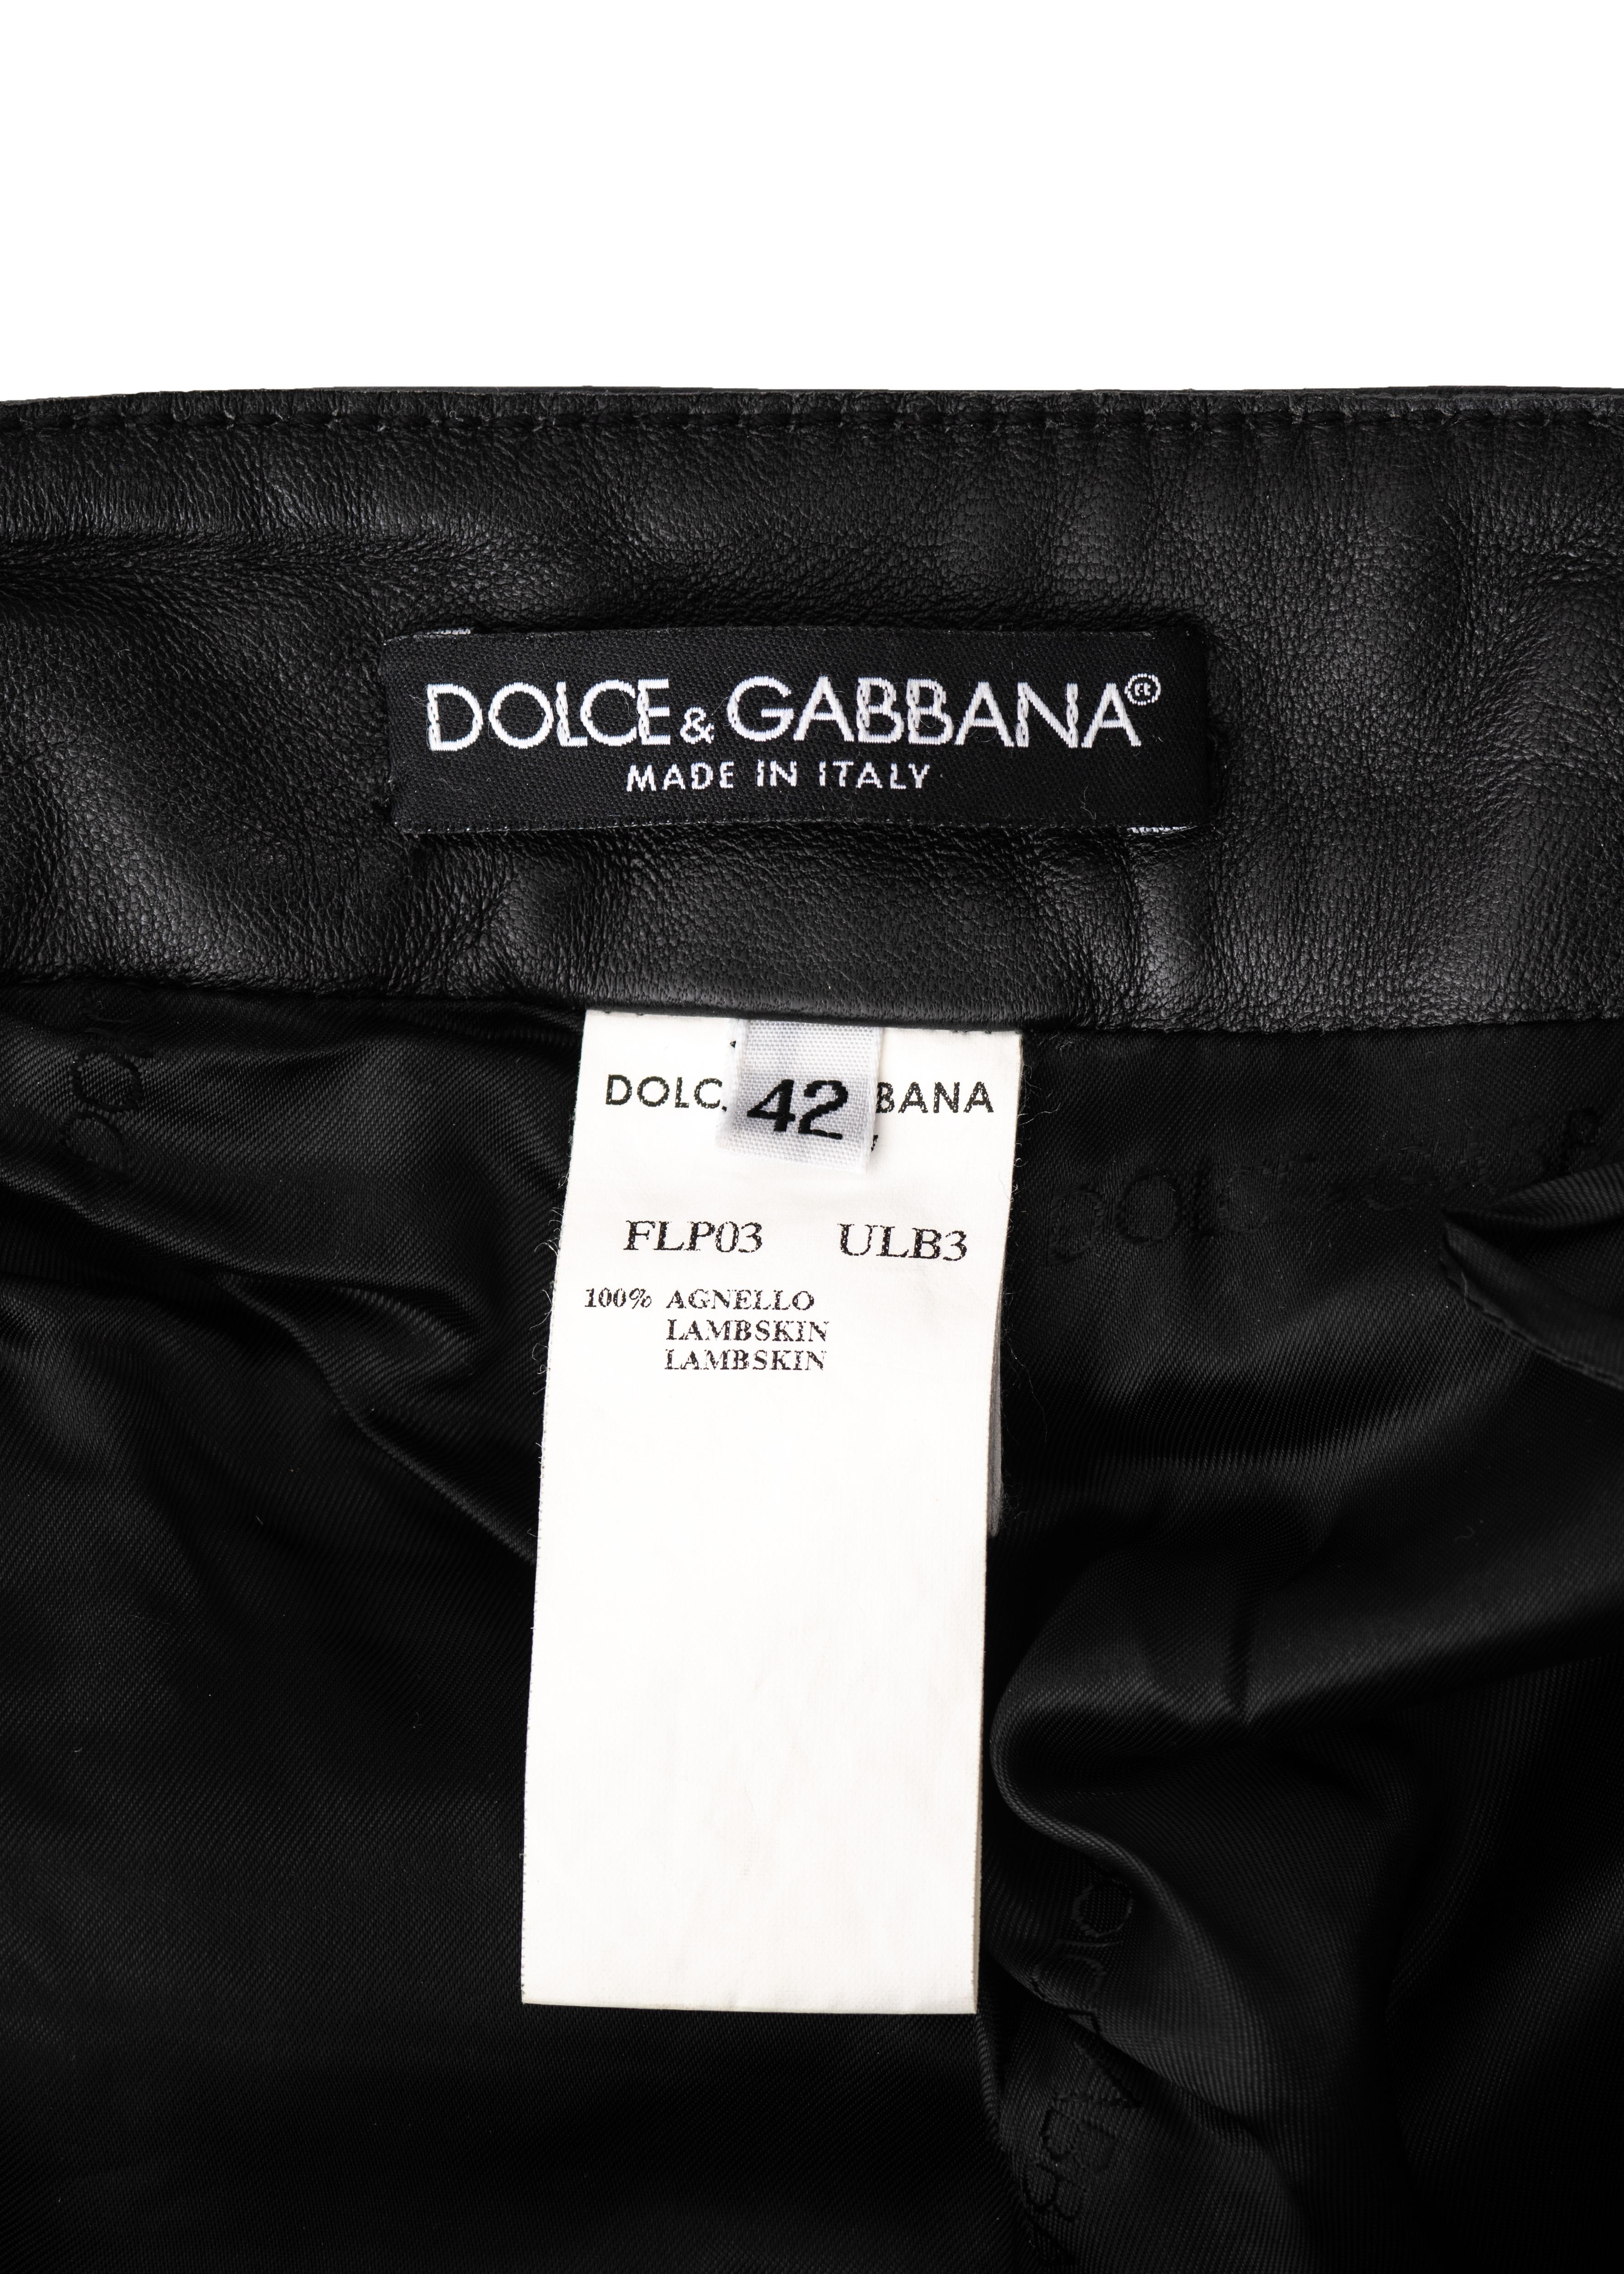 Dolce & Gabbana black lambskin leather pants with buckles and chains, ss 2003 5